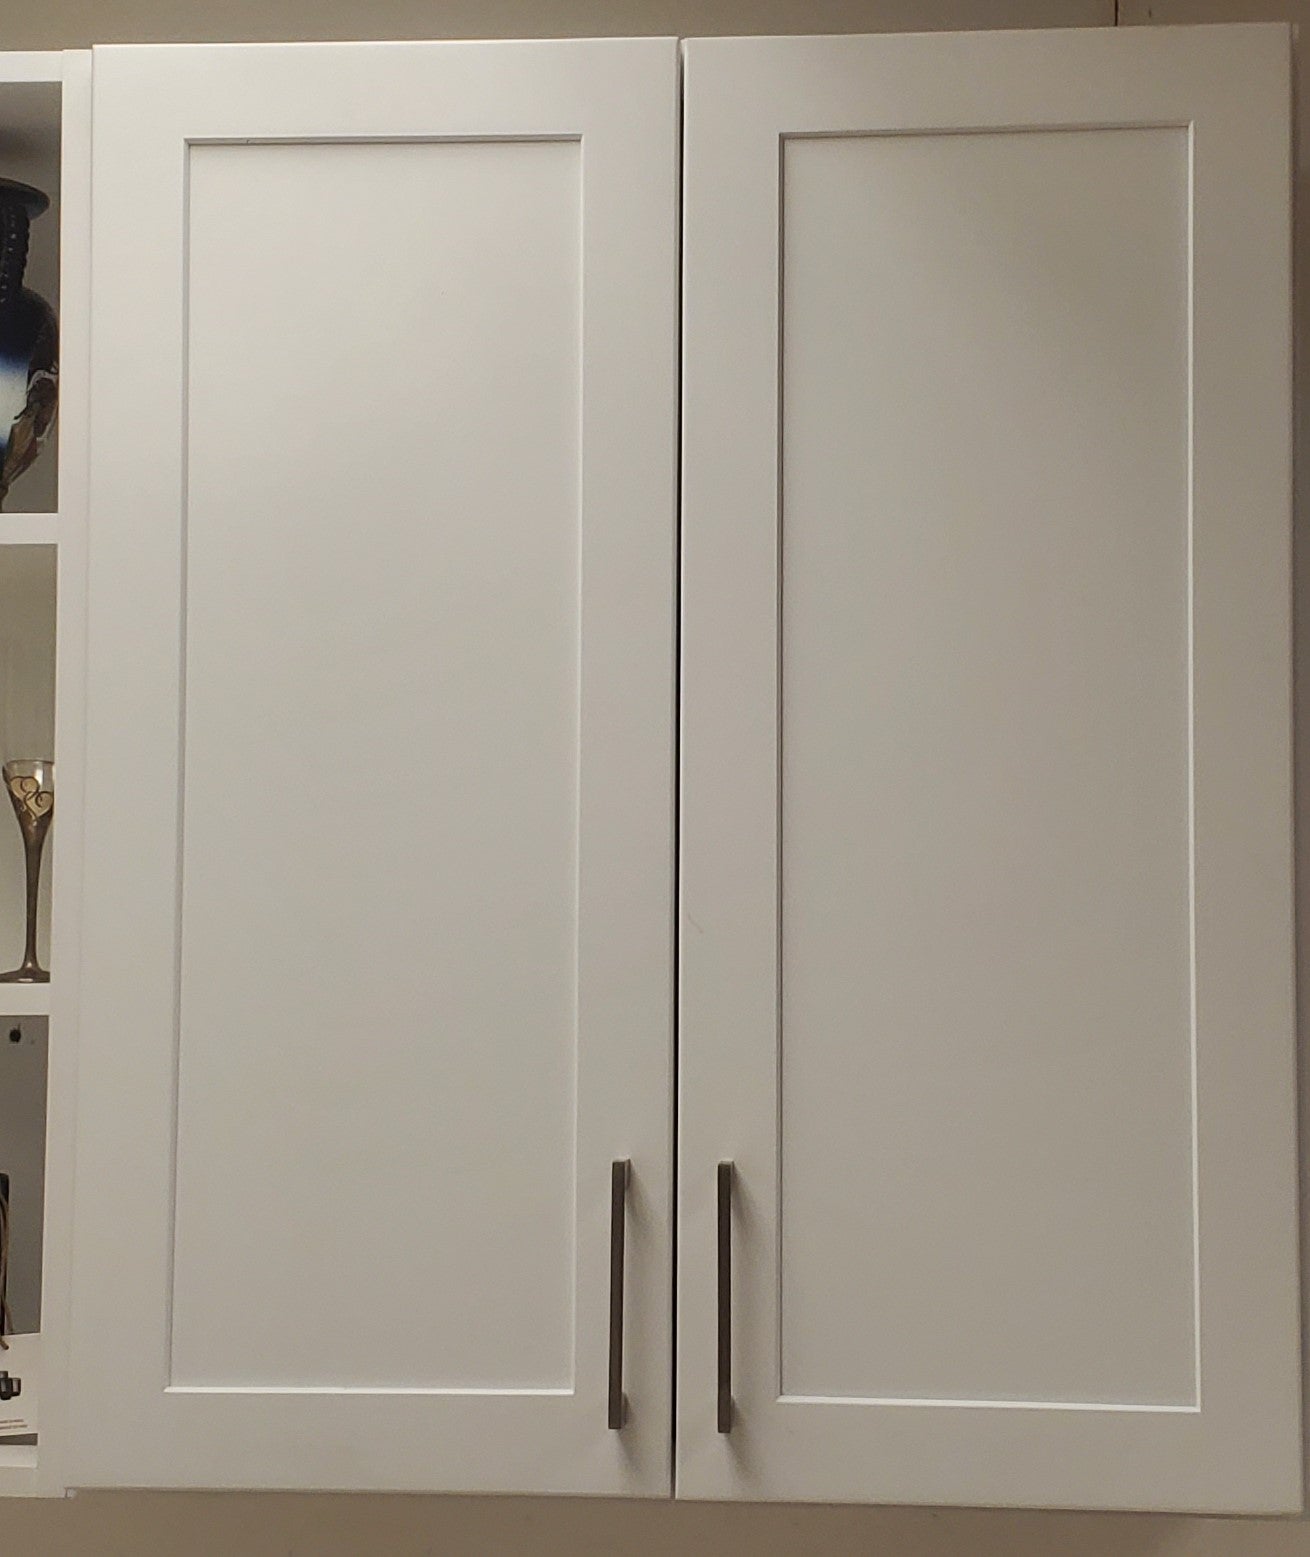 Gray Shaker 1-1/4" Overlay Base Cabinet - Two Doors 24", 27", 30", 33 & 36" Wide